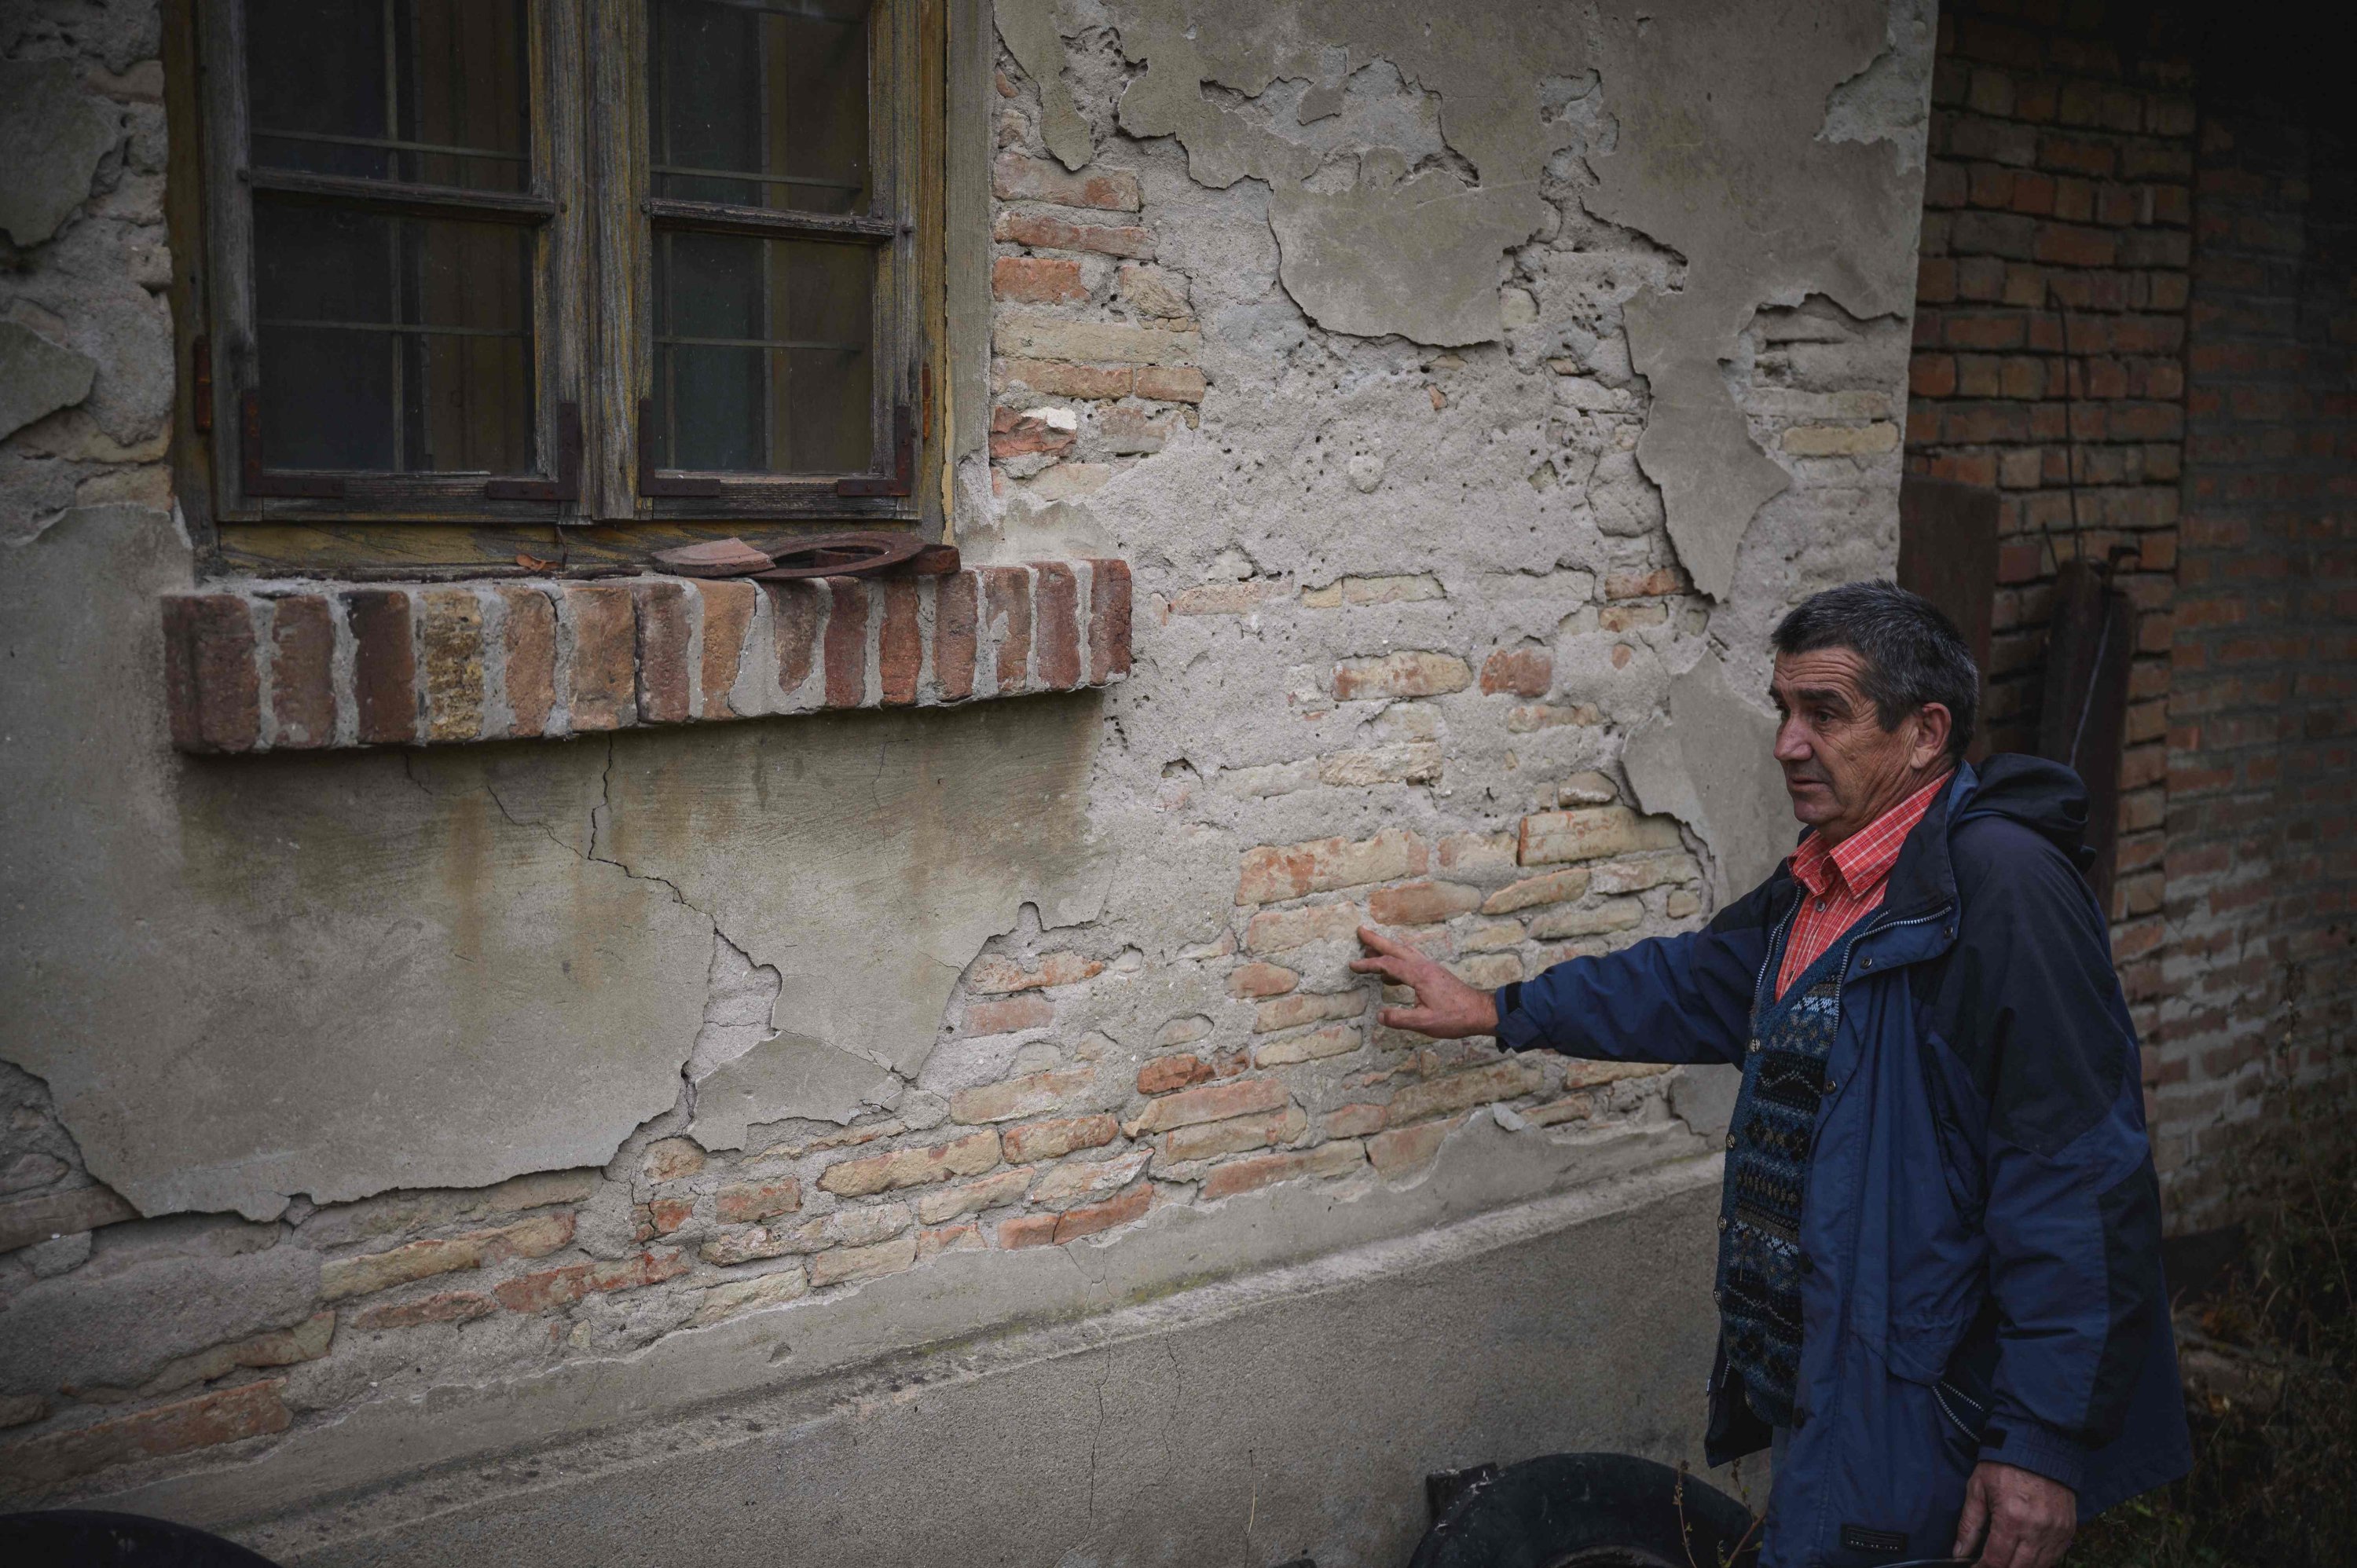 Dragan Jacanovic, an archeologist from the Museum of Pozarevac, shows the ancient Roman bricks in a wall of a house, Stari Kostolac, Serbia, Dec. 3, 2021. (AFP Photo)